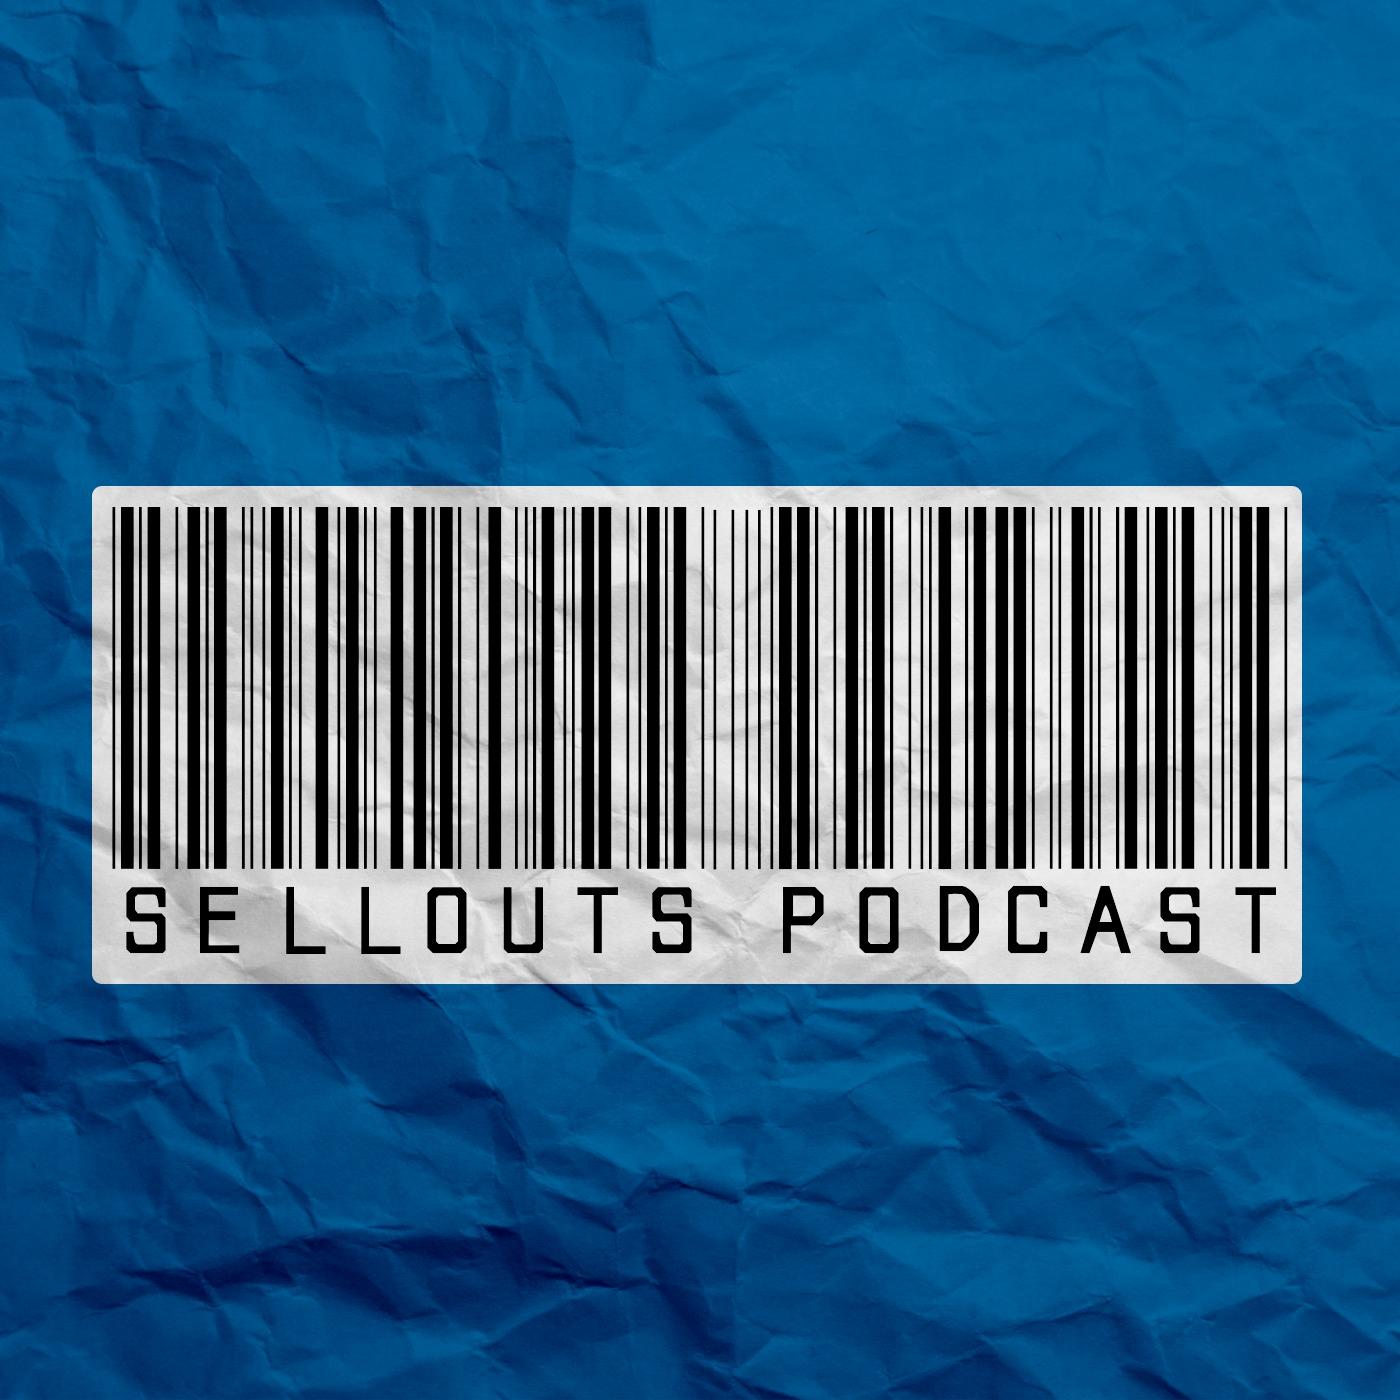 The Sellouts Podcast